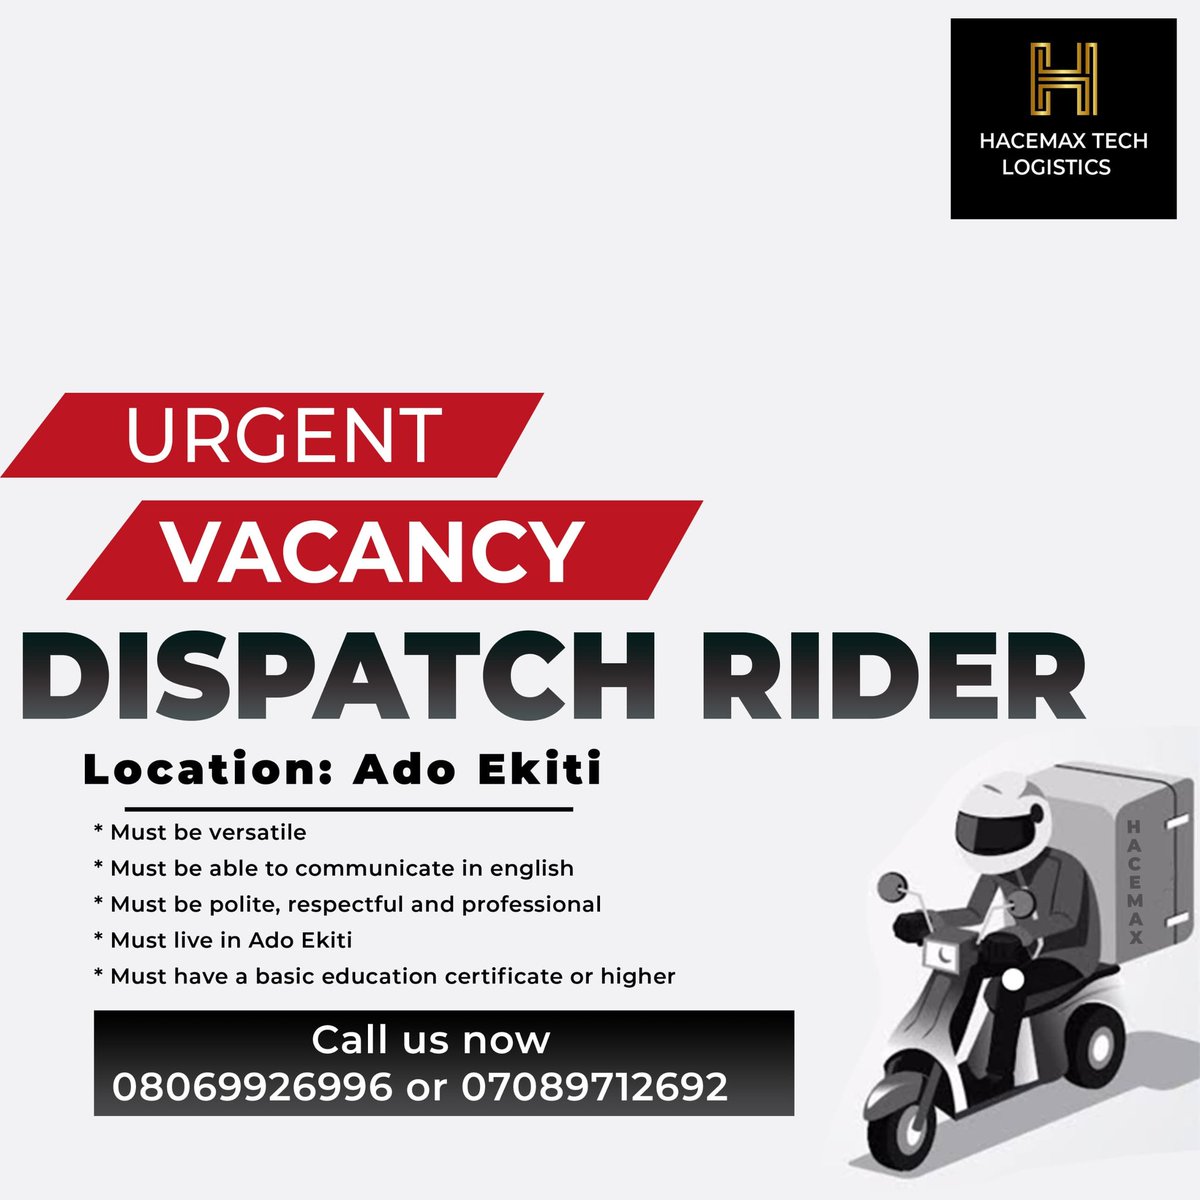 Vacancy ⚠️ 📢 

A dispatch rider is needed at Hace Max Logistics. 
Kindly call us on:
- 08069926996
- 07089712692

Please note: Bike is available.